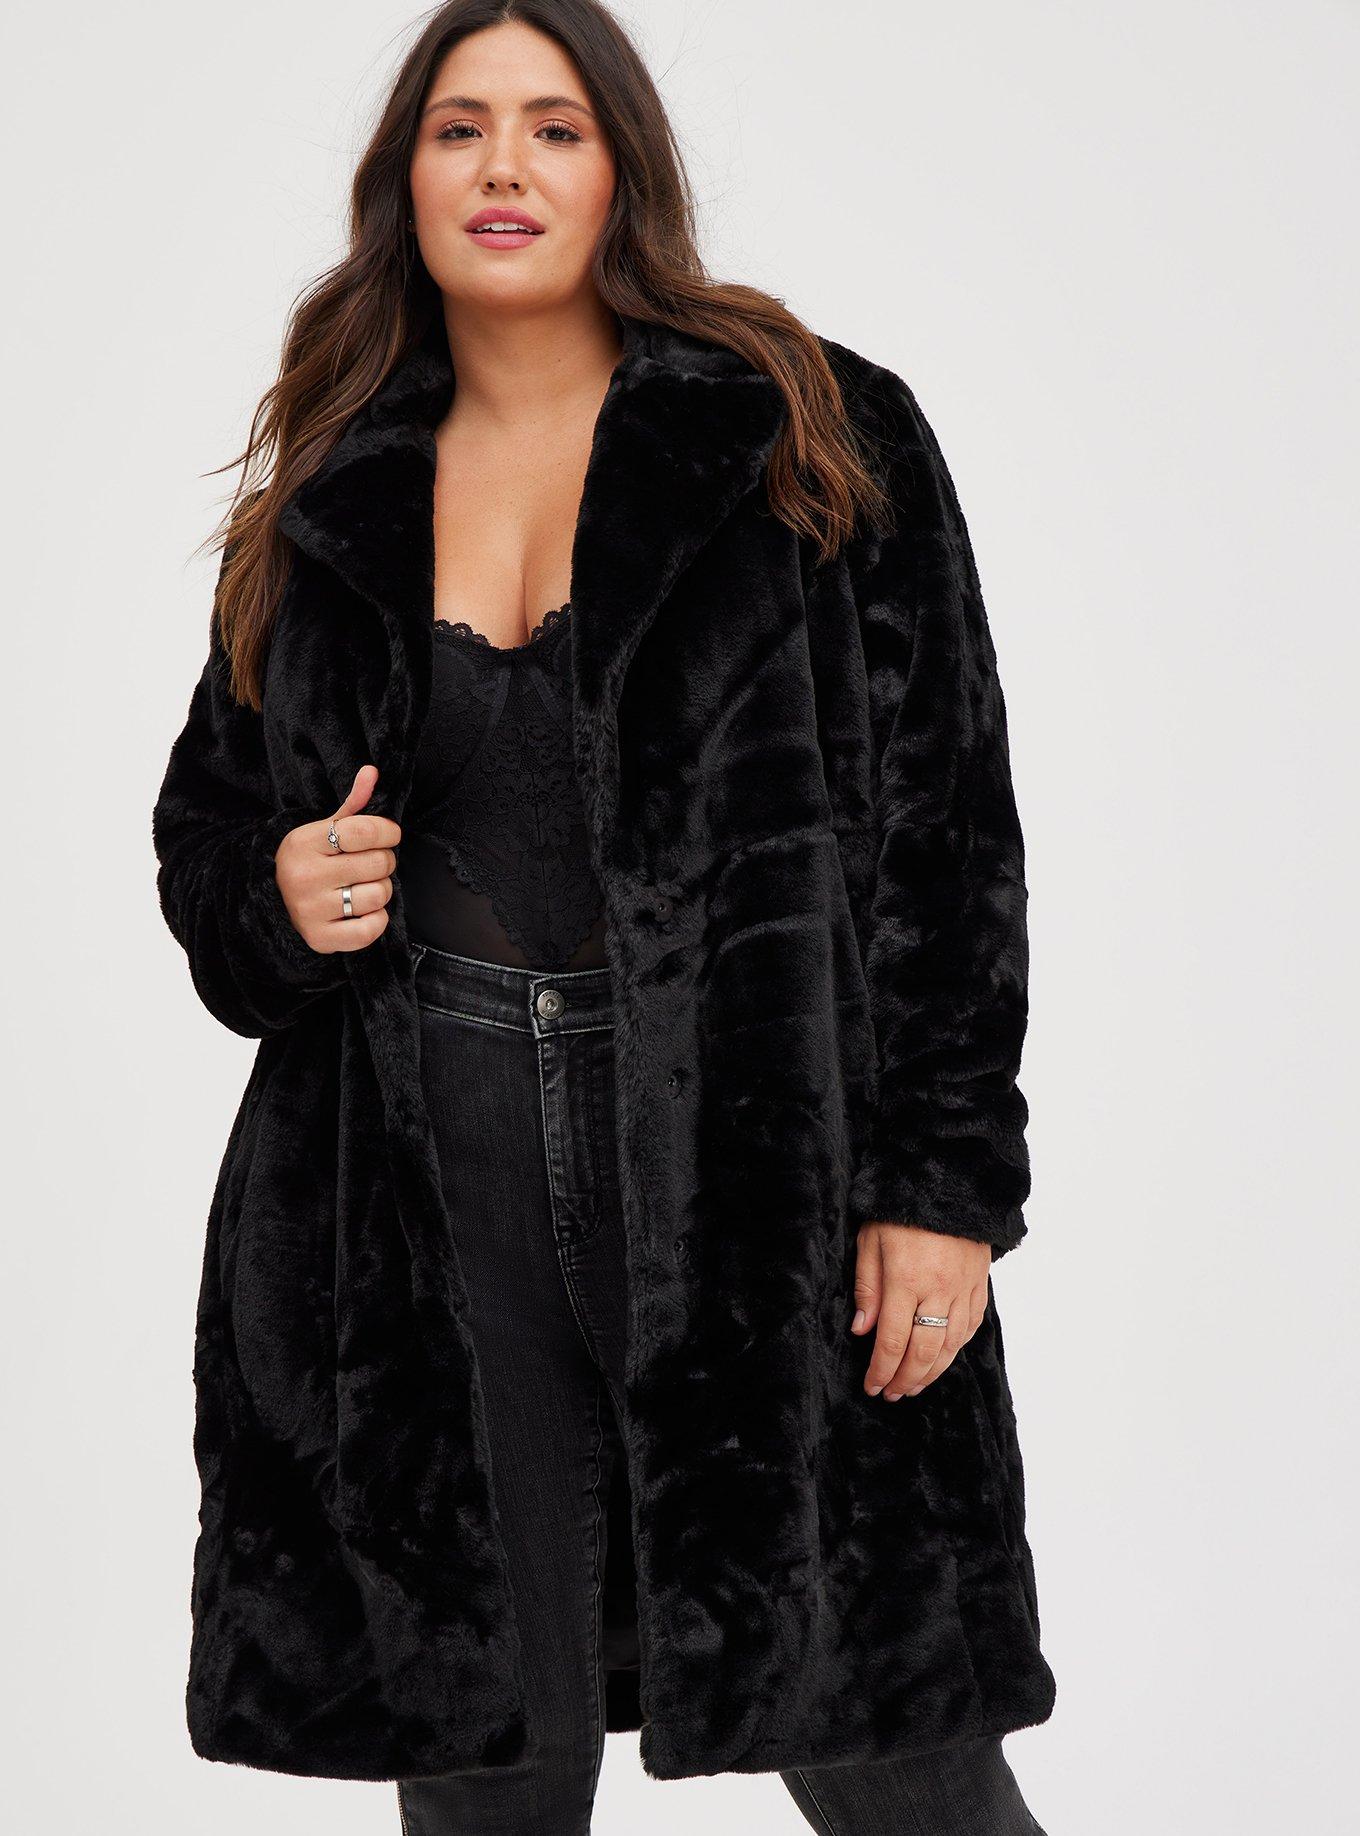 Winter Faux Fur Coat for Women, Hairy Warm Soft Thick Colored Faux Fur Coat  With Hood